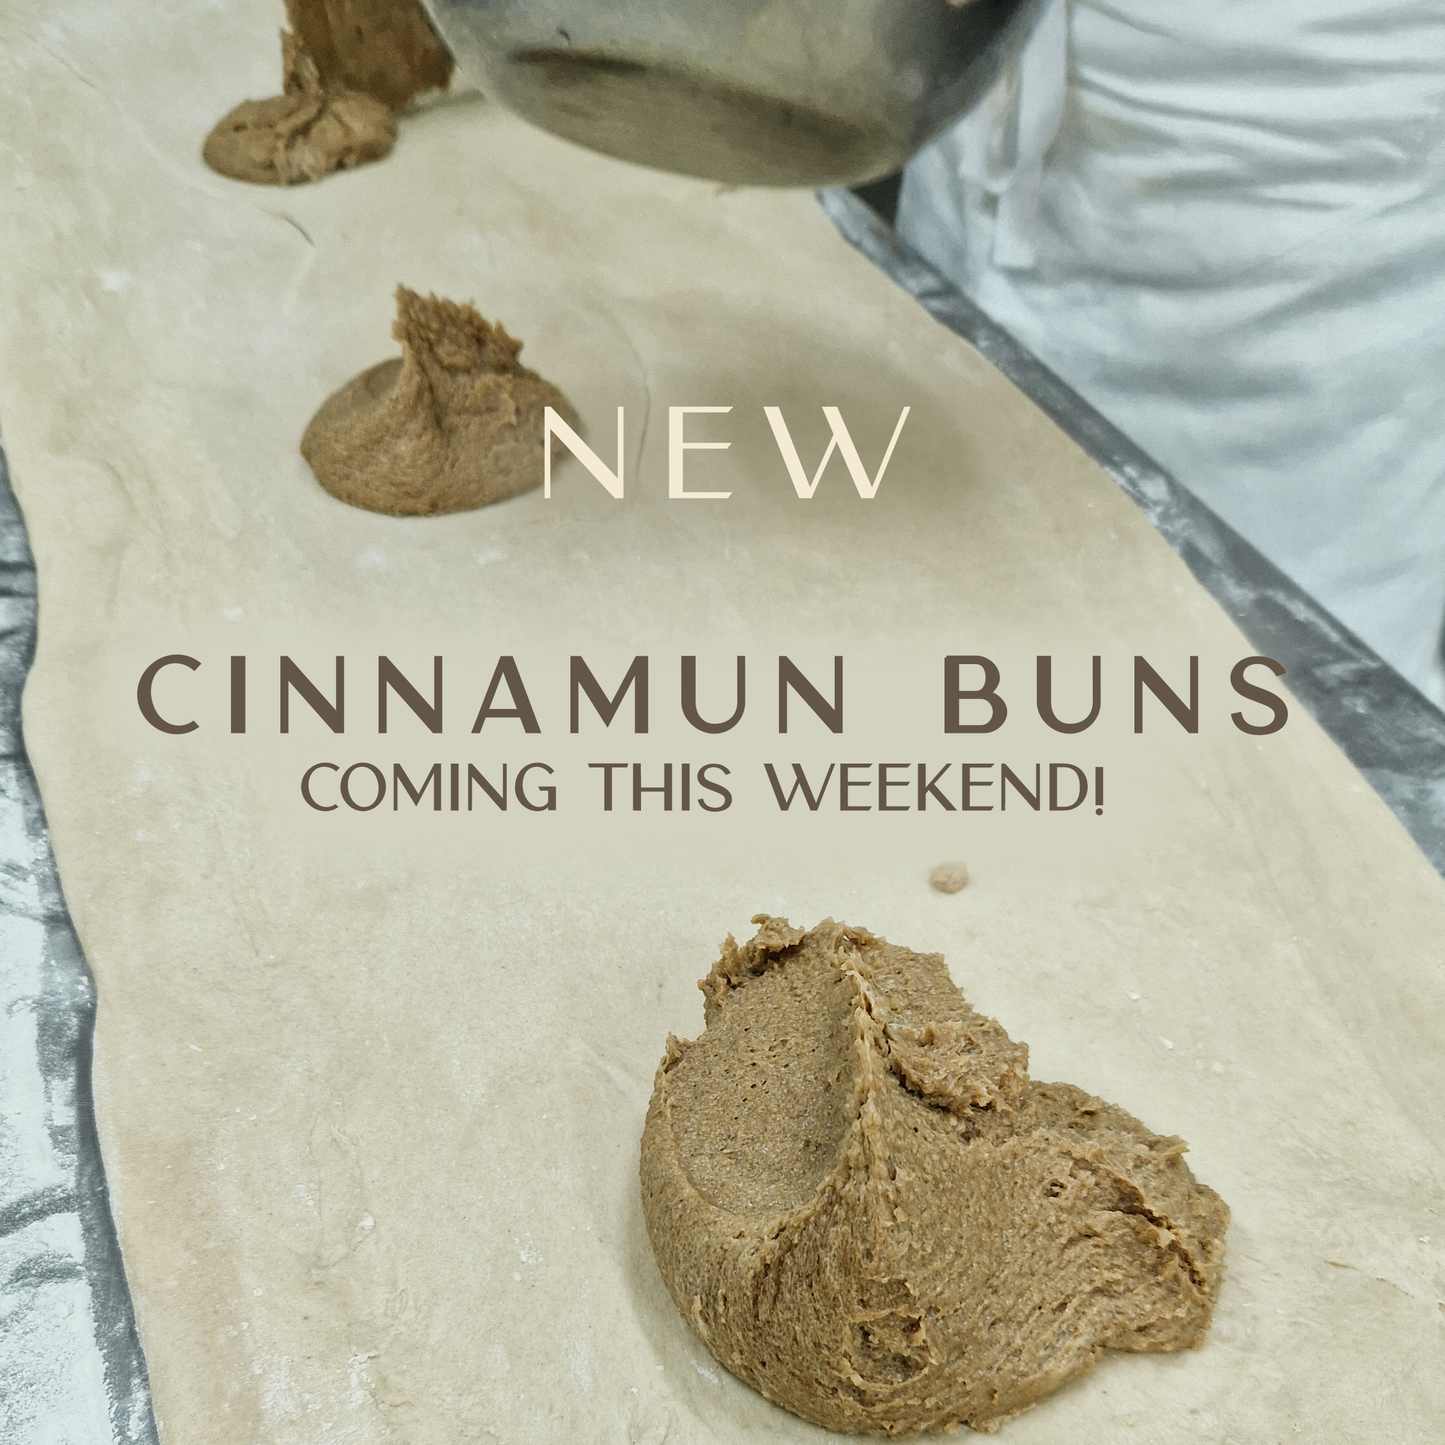 A Cinnamon Roll dough being prepared and edited is written "New Cinnamon Buns coming this weekend!".